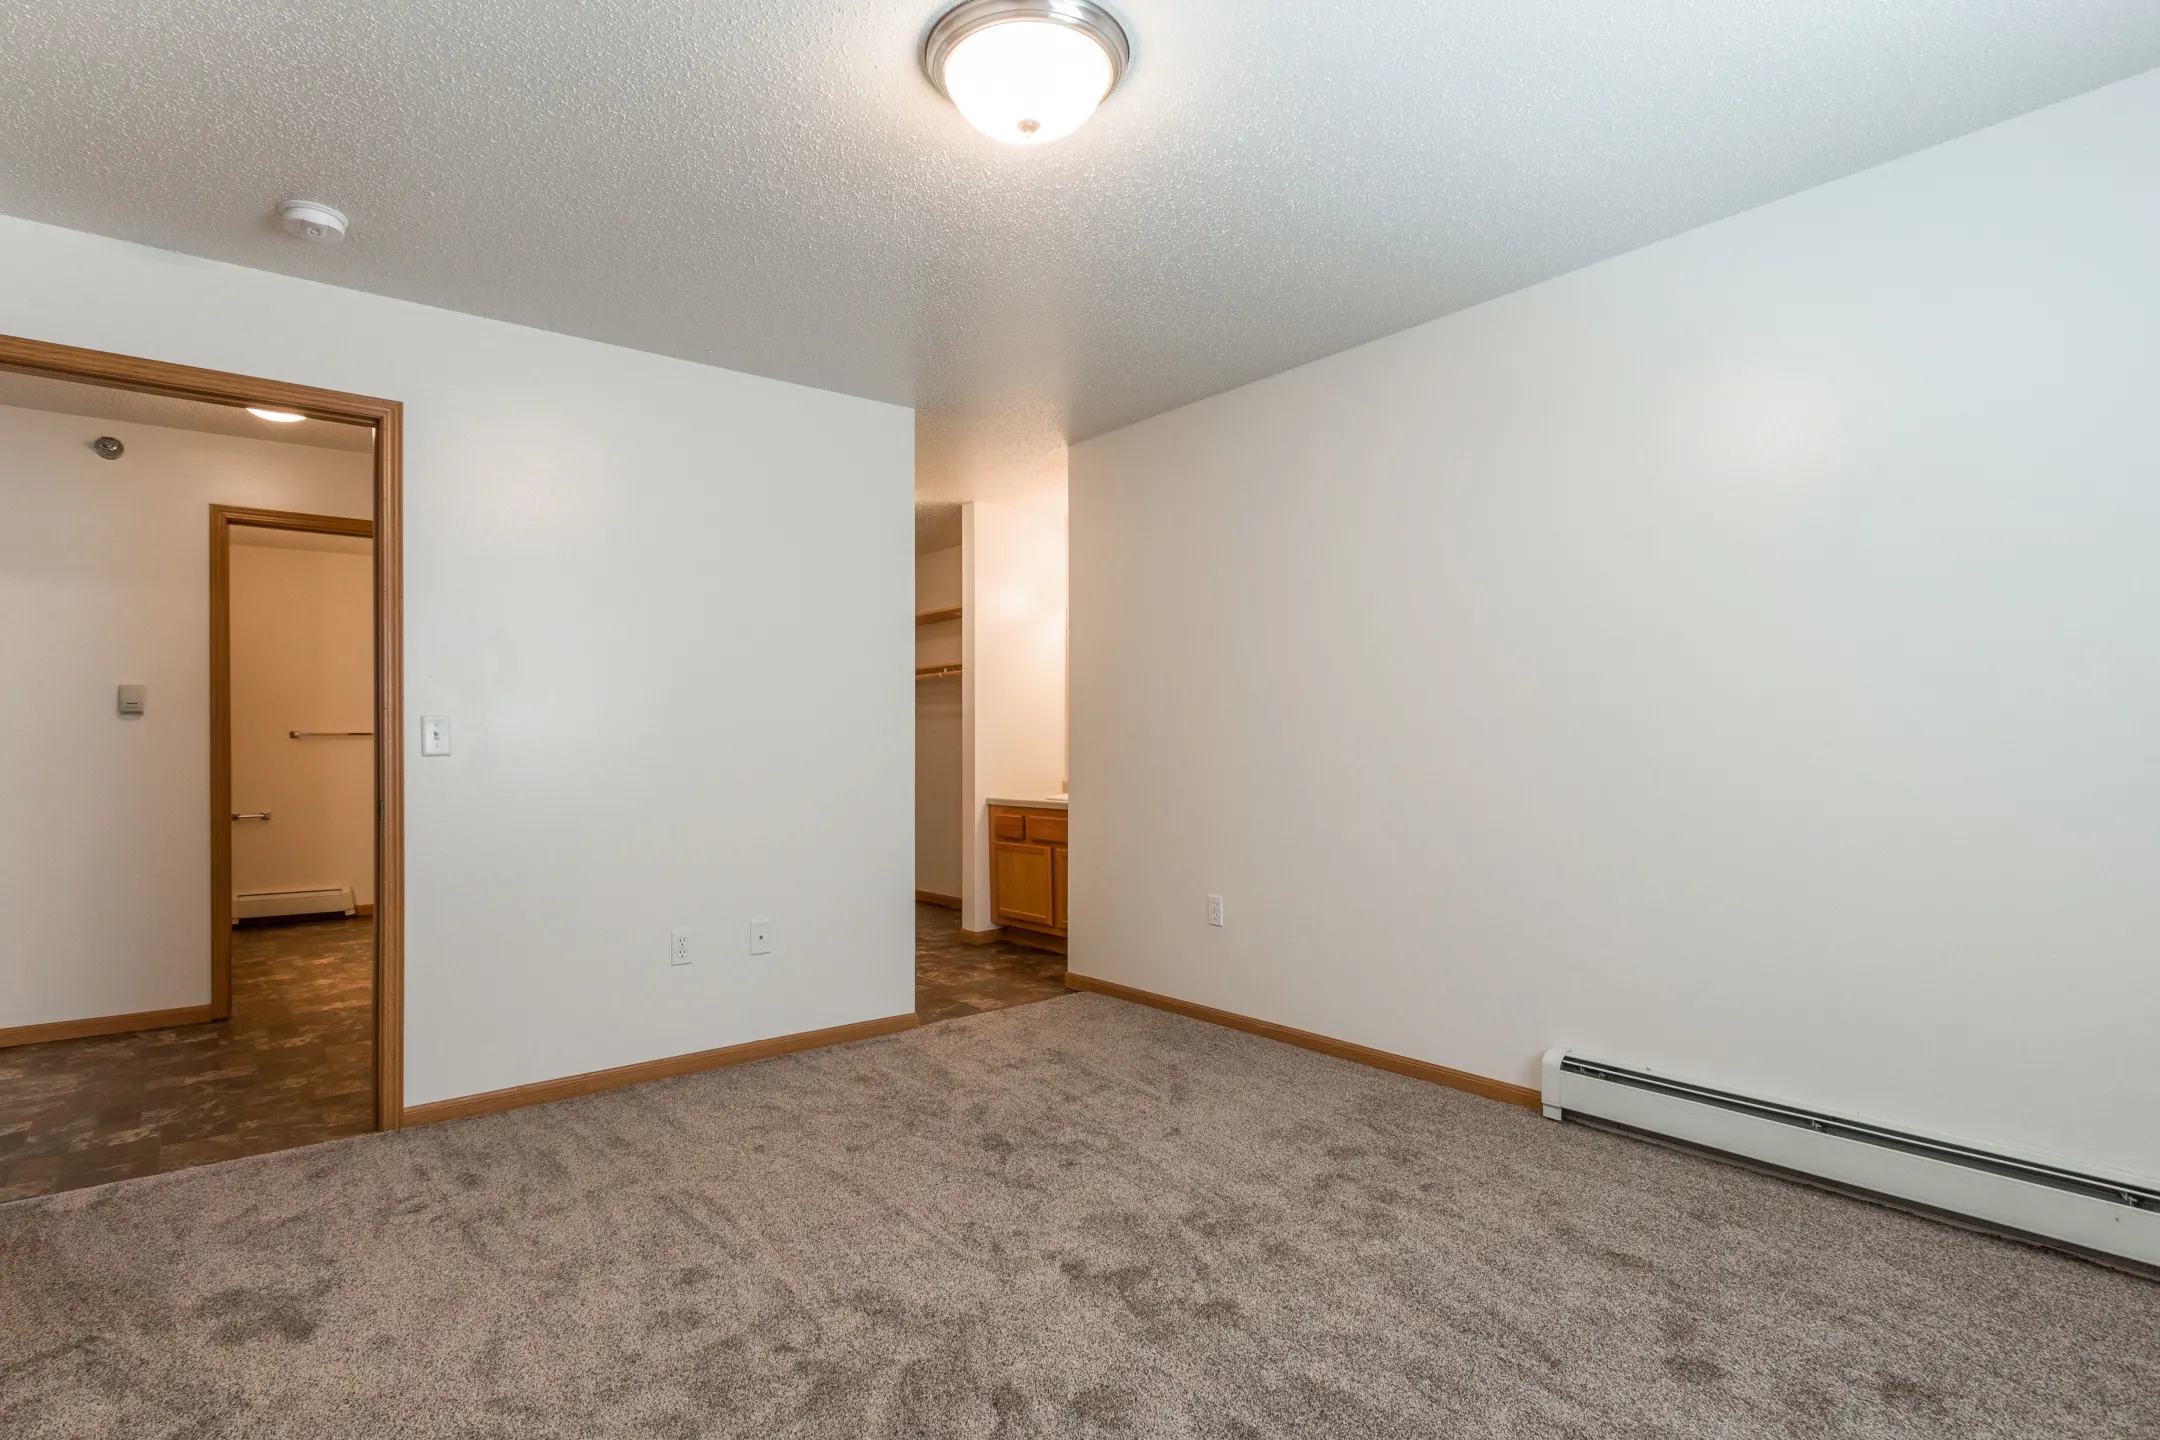 Bedroom - Central Park Apartments - Fargo, ND